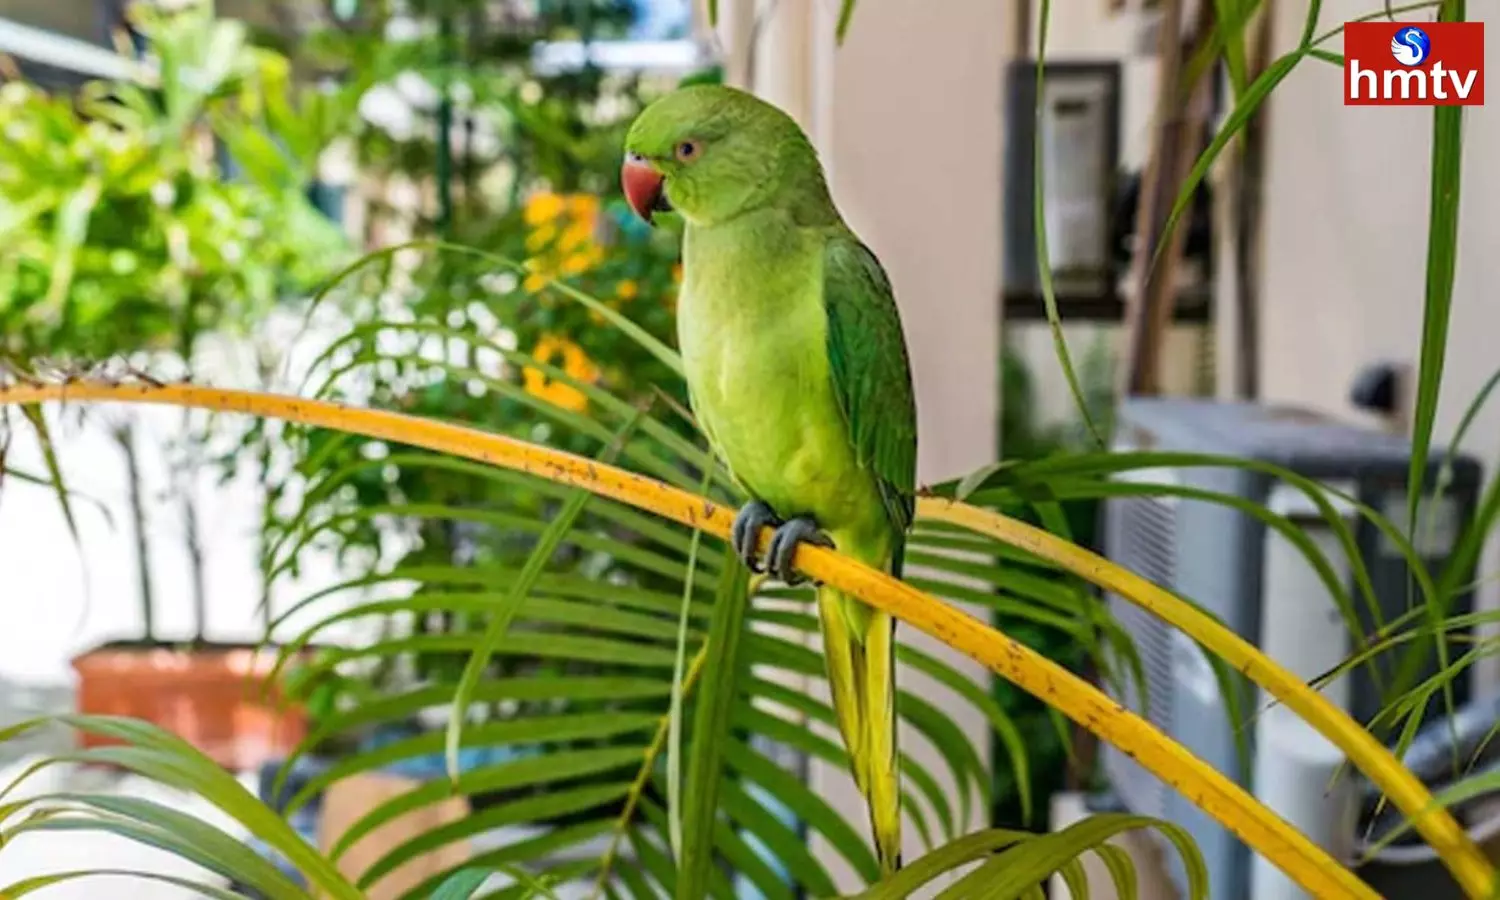 Are you Keeping a Parrot at Home Then Focus on These 3 Things Otherwise Life at Risk Check Vastu Shastra